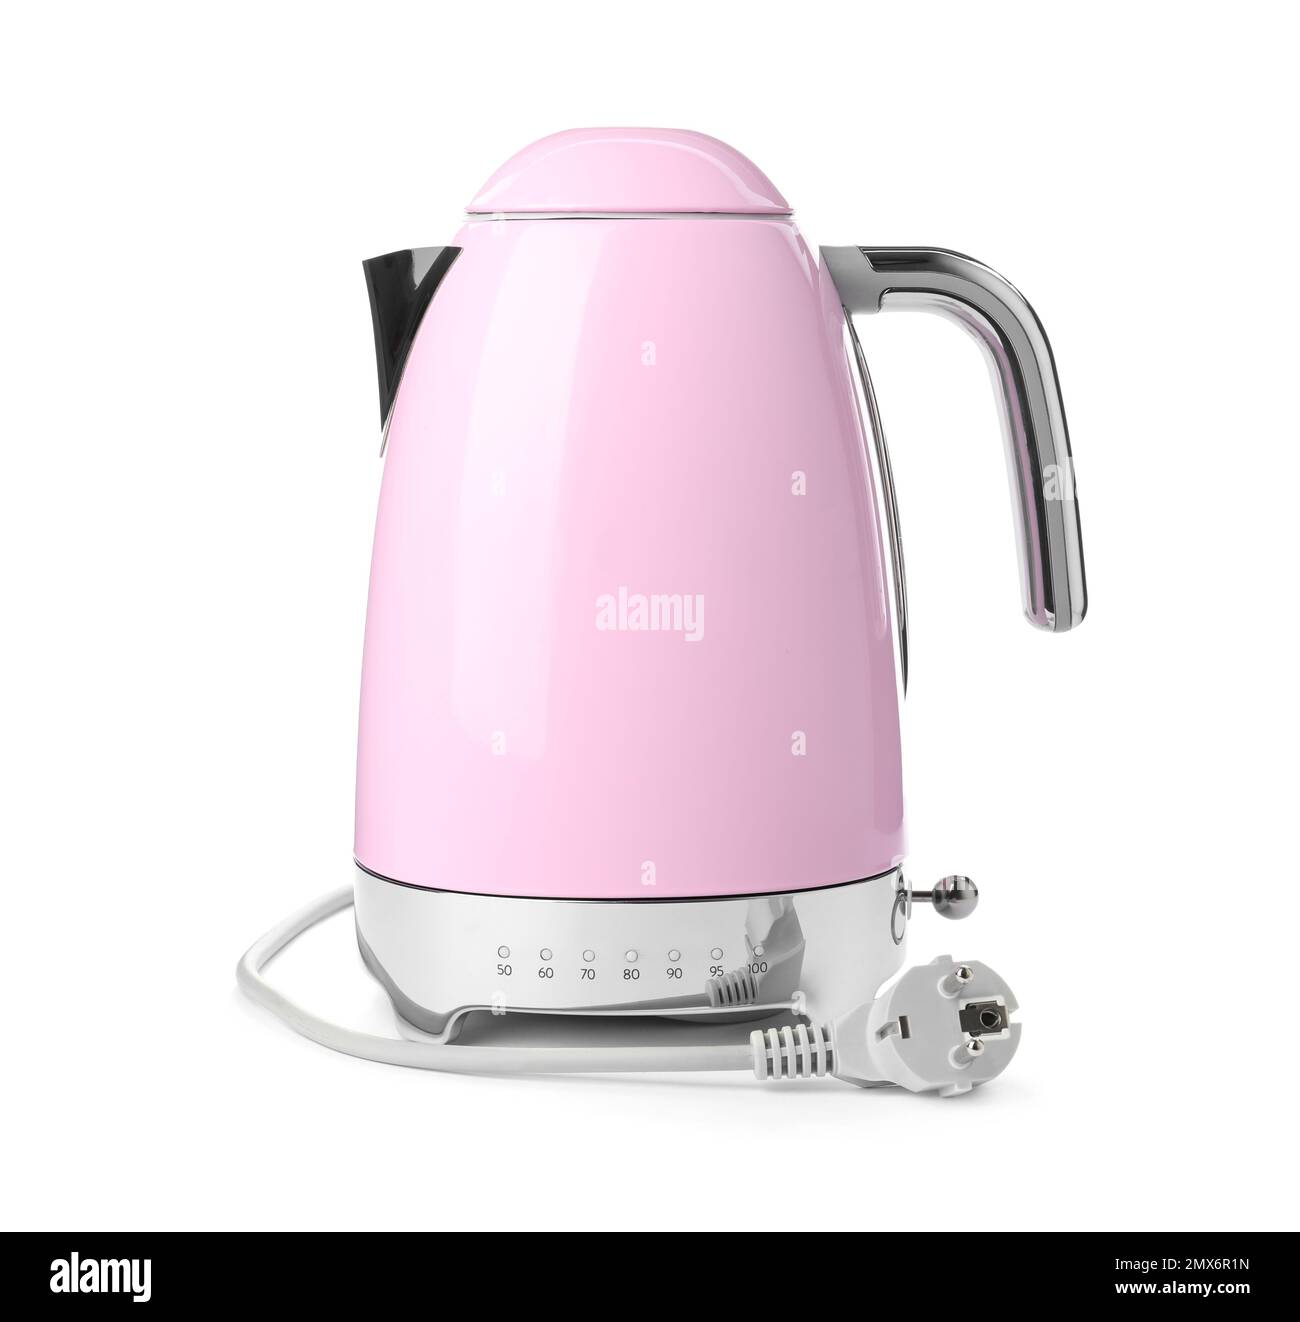 https://c8.alamy.com/comp/2MX6R1N/modern-pink-electric-kettle-with-base-and-plug-isolated-on-white-2MX6R1N.jpg